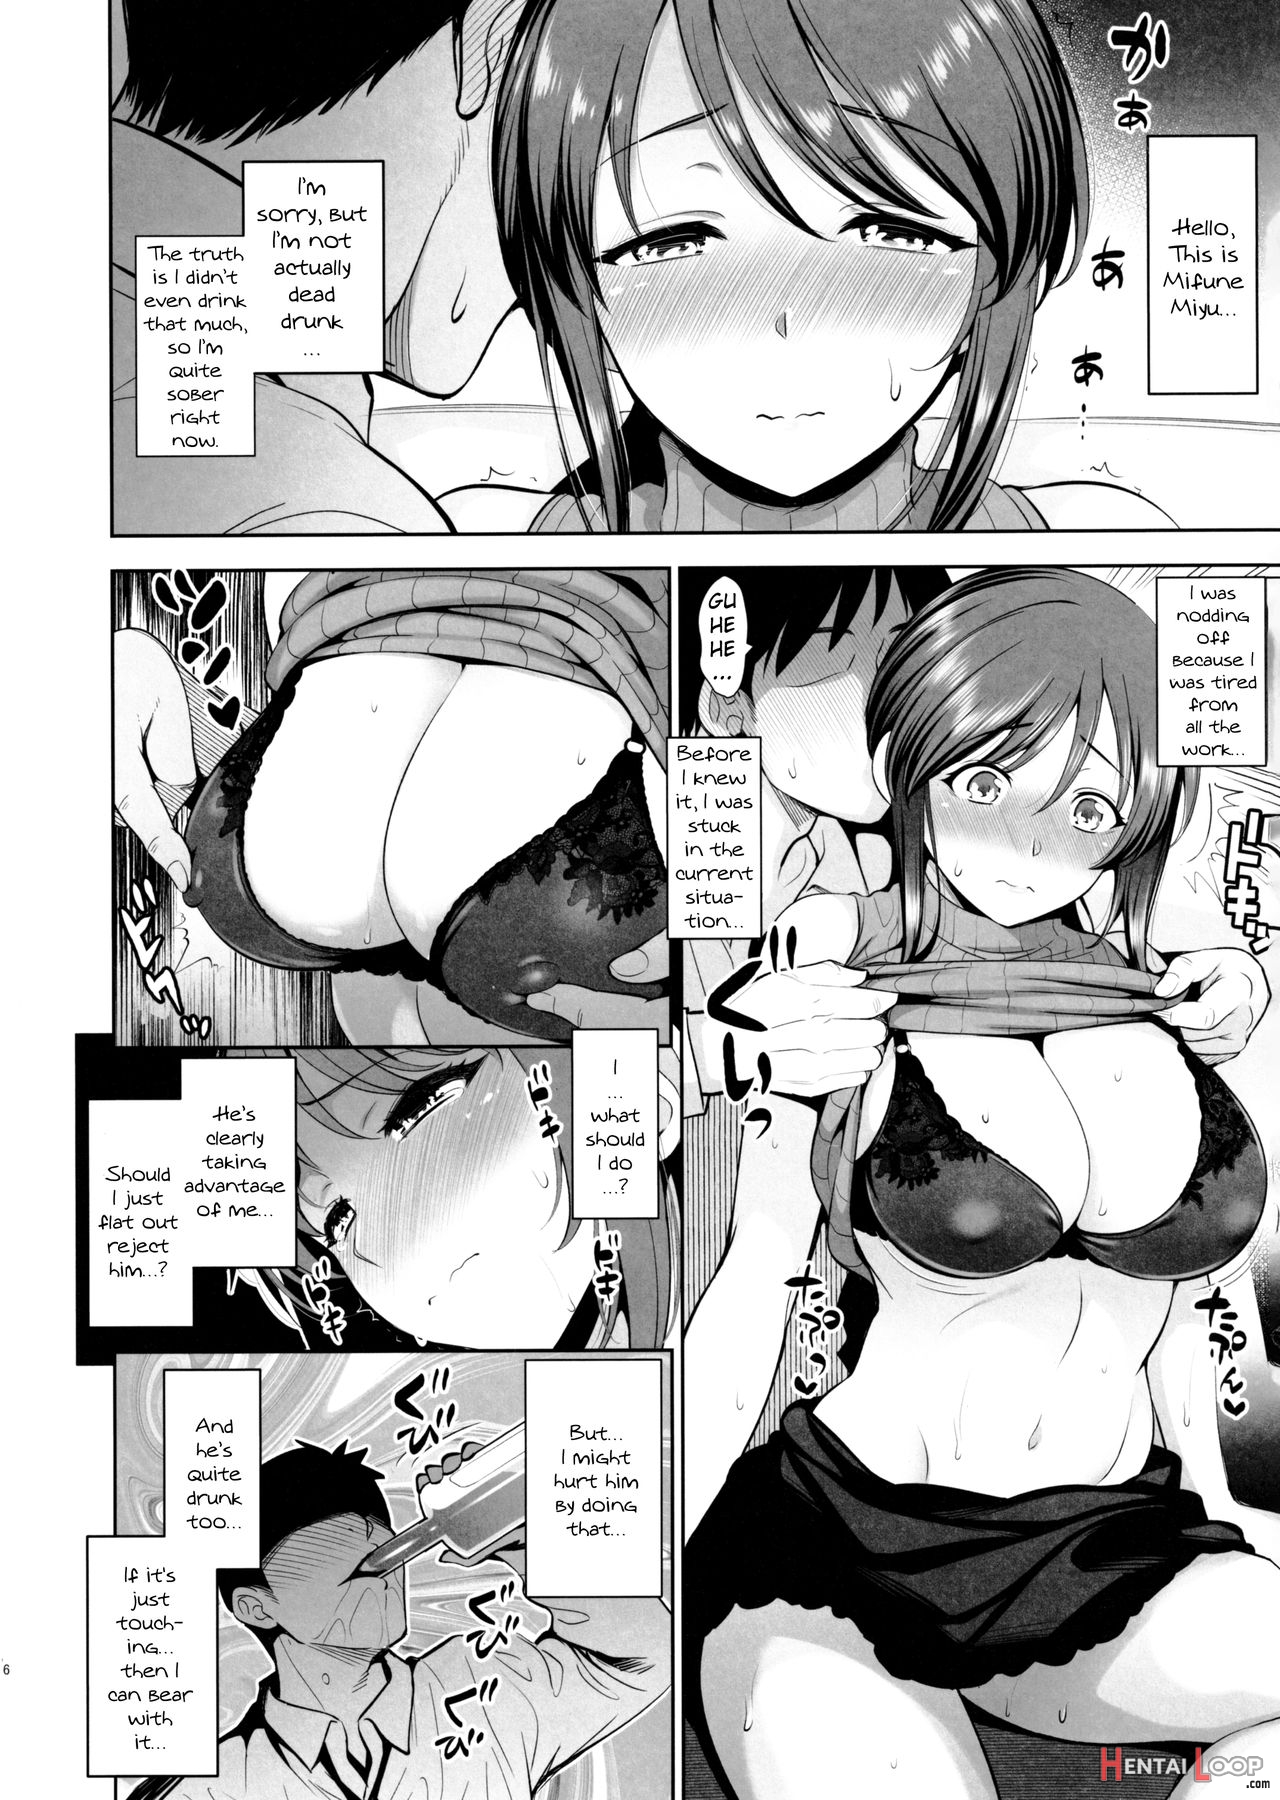 Mifune Miyu Wants To Get Pregnant page 4